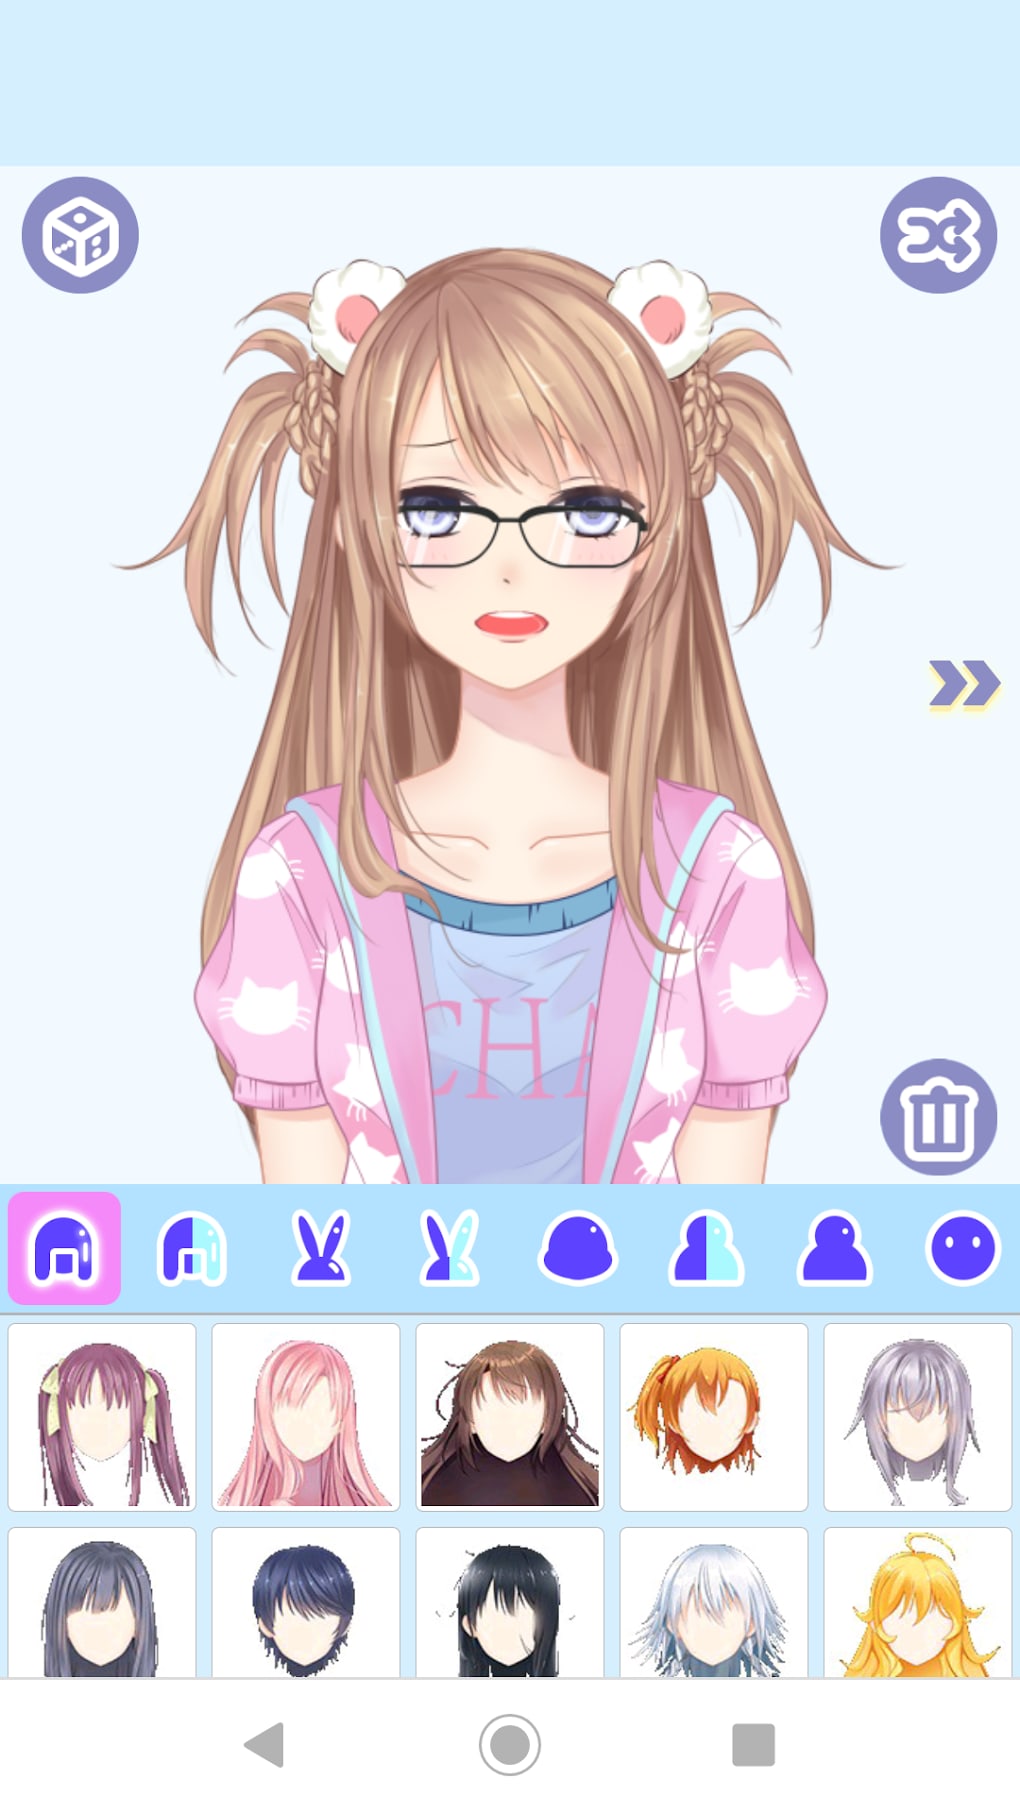 Anime Avatar Maker: Are you tired of the same old avatars that come with your social media profiles? Want to show off your love for anime and stand out from the crowd? Well, you\'re in luck because the newest anime avatar maker is here. With limitless options for customization, you can create a unique and stunning avatar that reflects your personality and style perfectly. Stay ahead of the curve and get creative with the amazing anime avatar maker today!